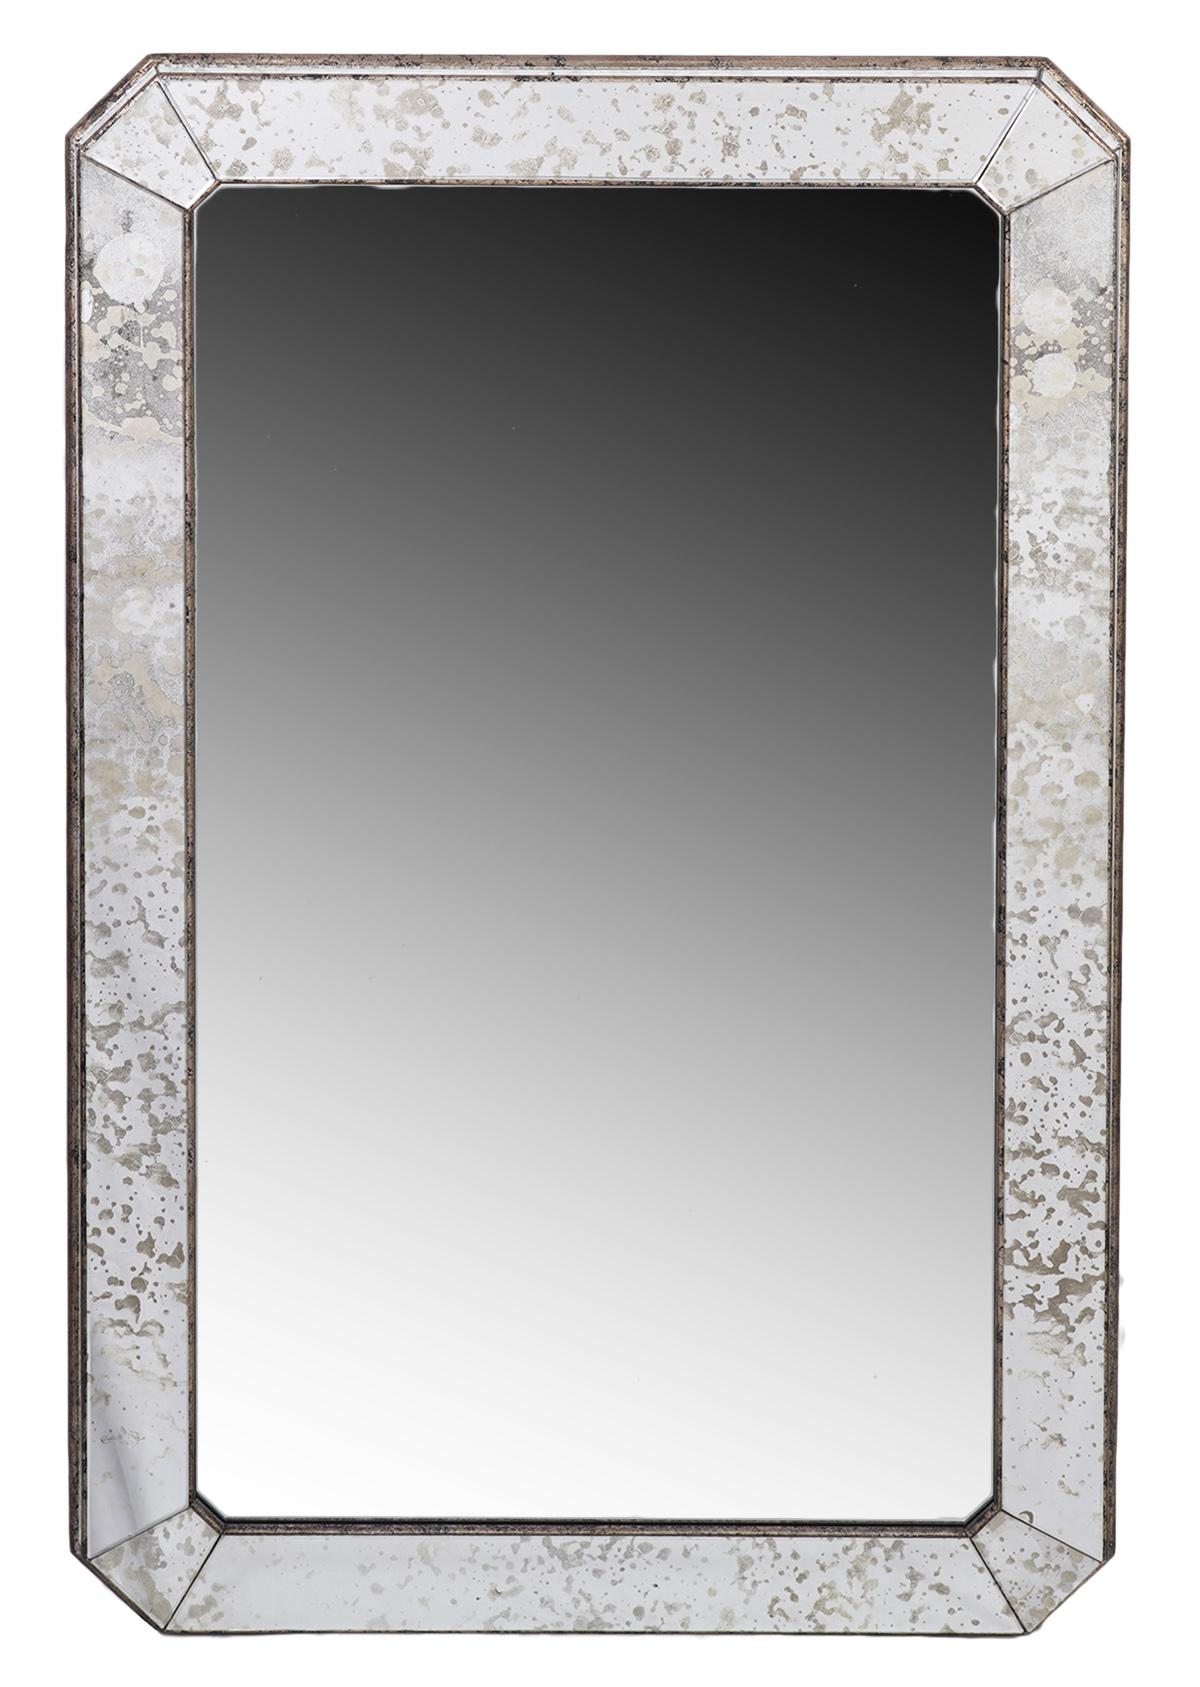 Echoing the masterful adeptness that Venetian glass makers achieved when they turned their attention to furniture, these mirror feature wooden silver toned frames with panels of mottled glass that contributes to the cohesive design.